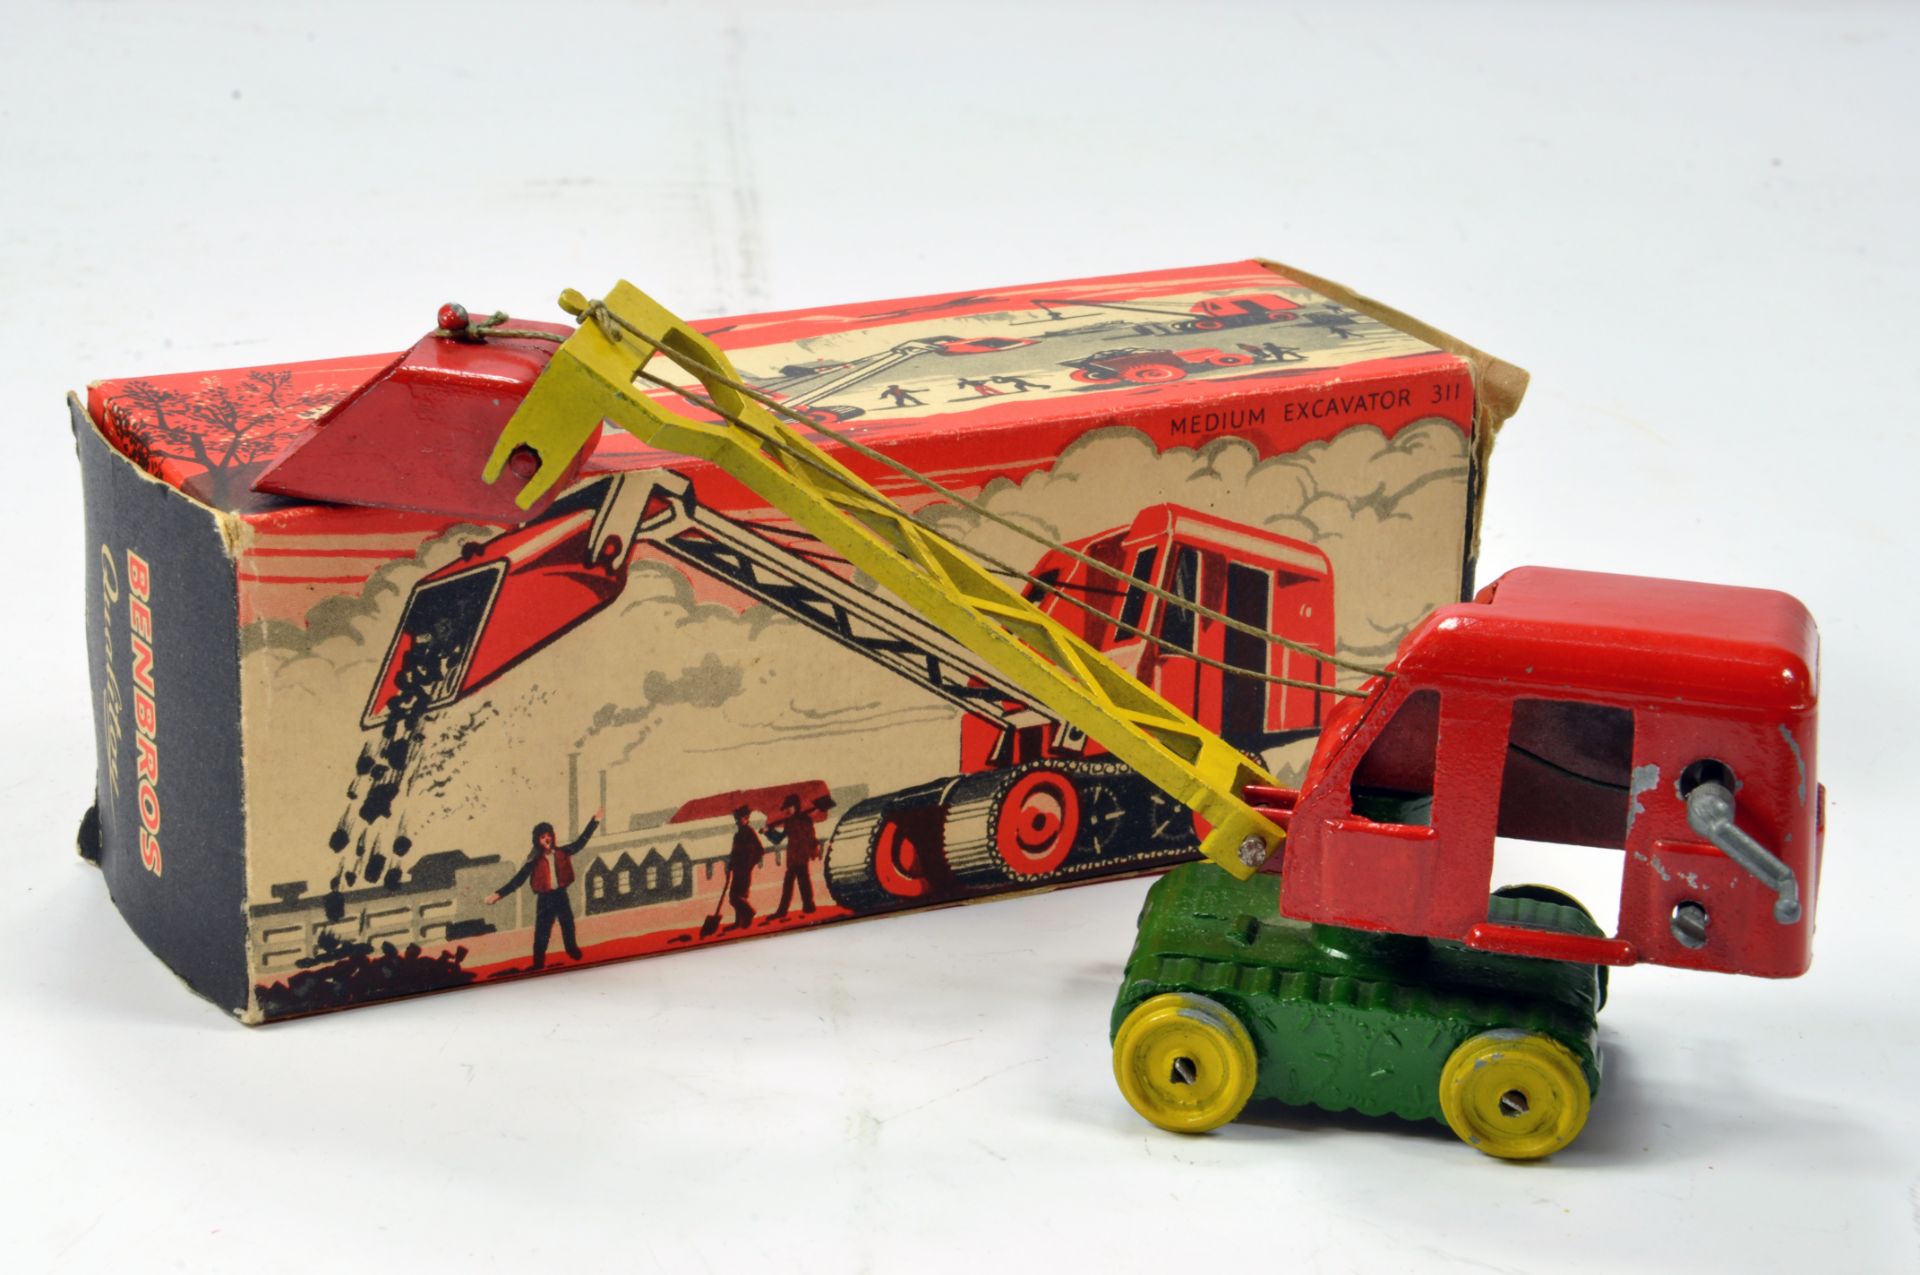 Benbros No. 311 early issue Medium Excavator in red, green and yellow with bucket. Lacks Tracks